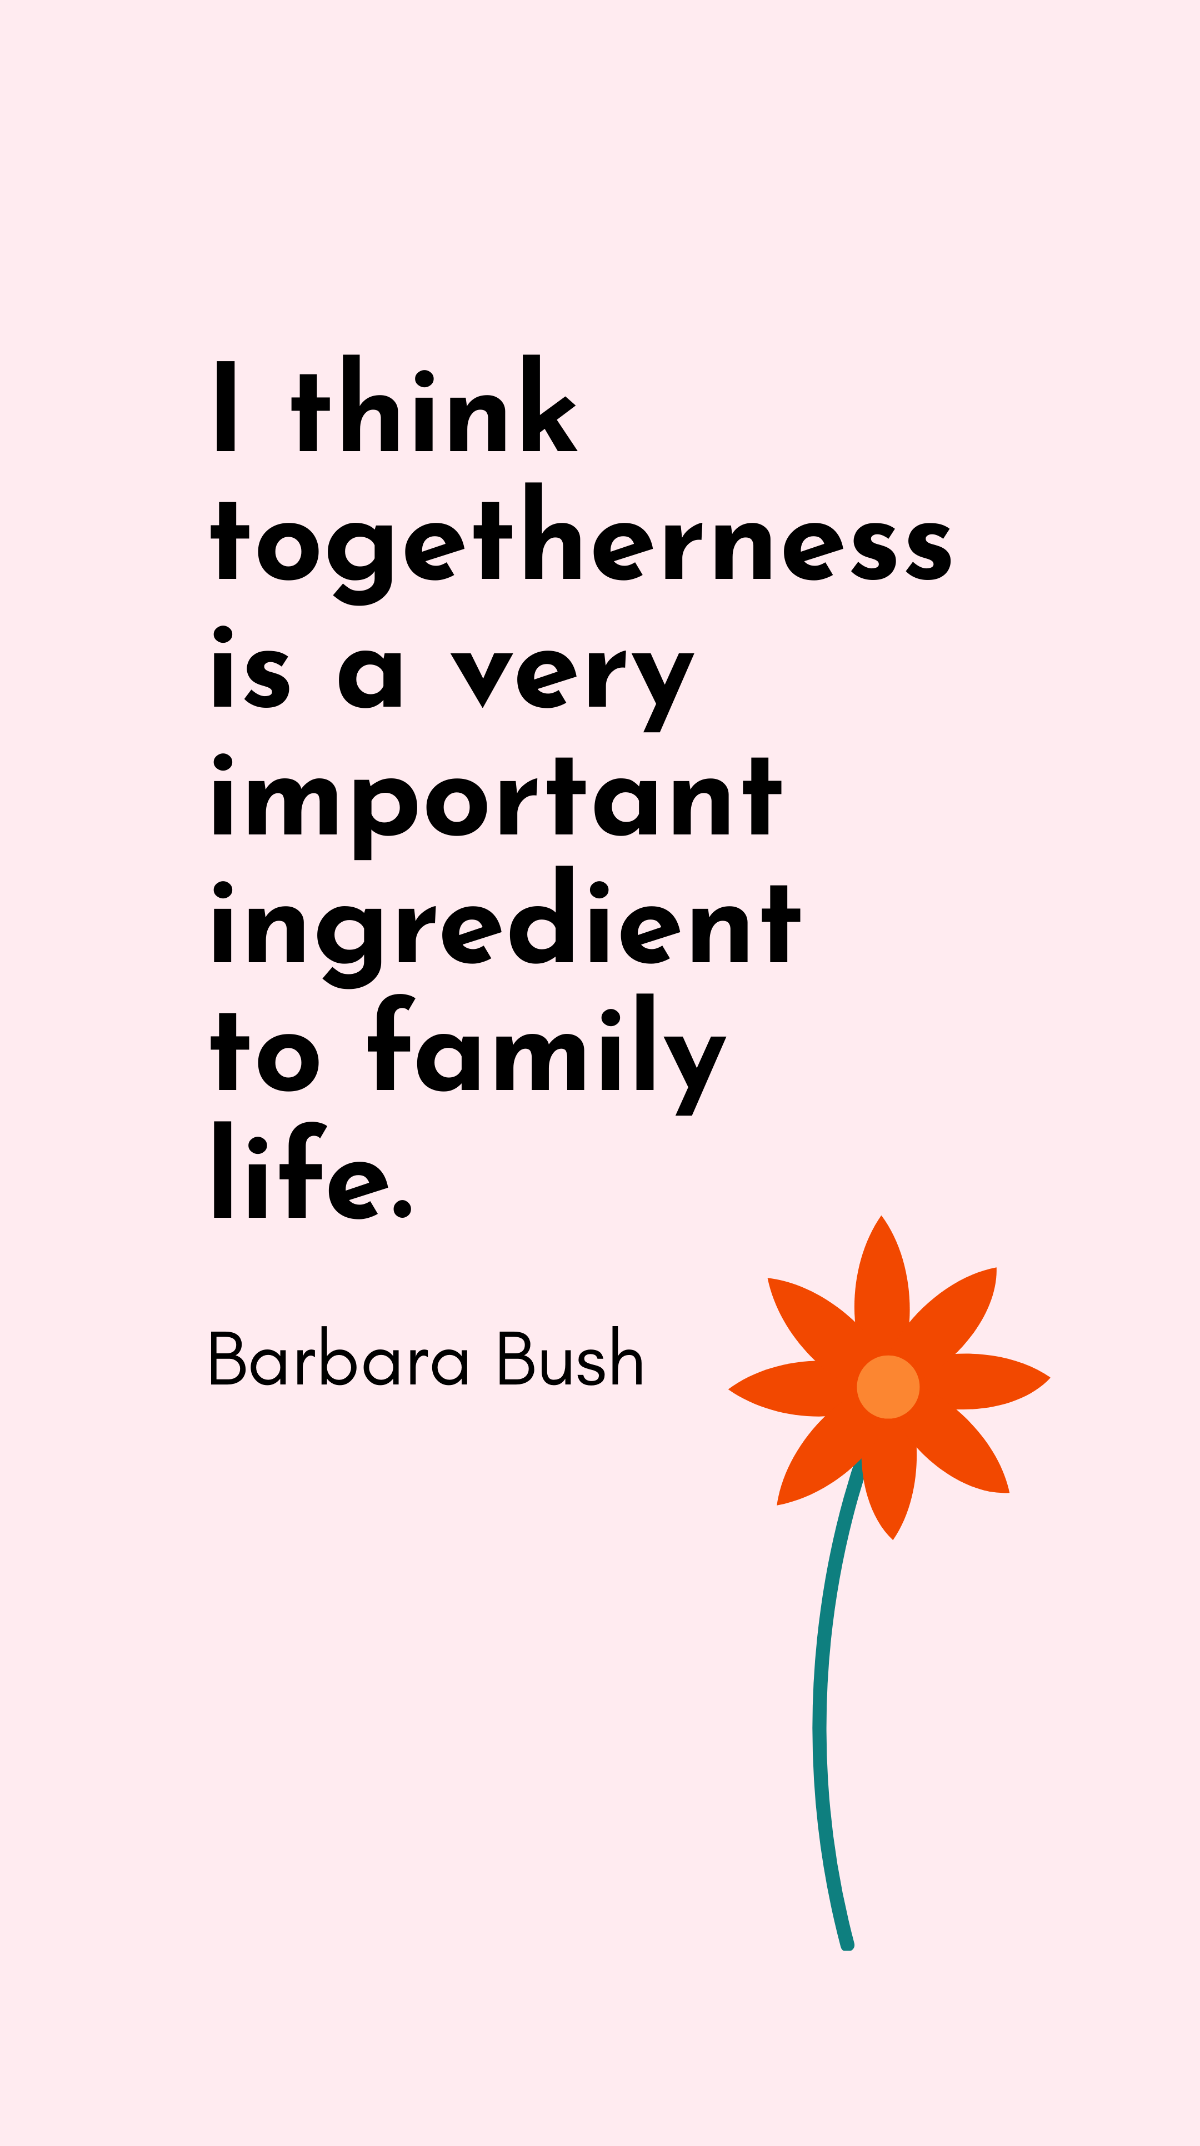 Barbara Bush - I think togetherness is a very important ingredient to family life.